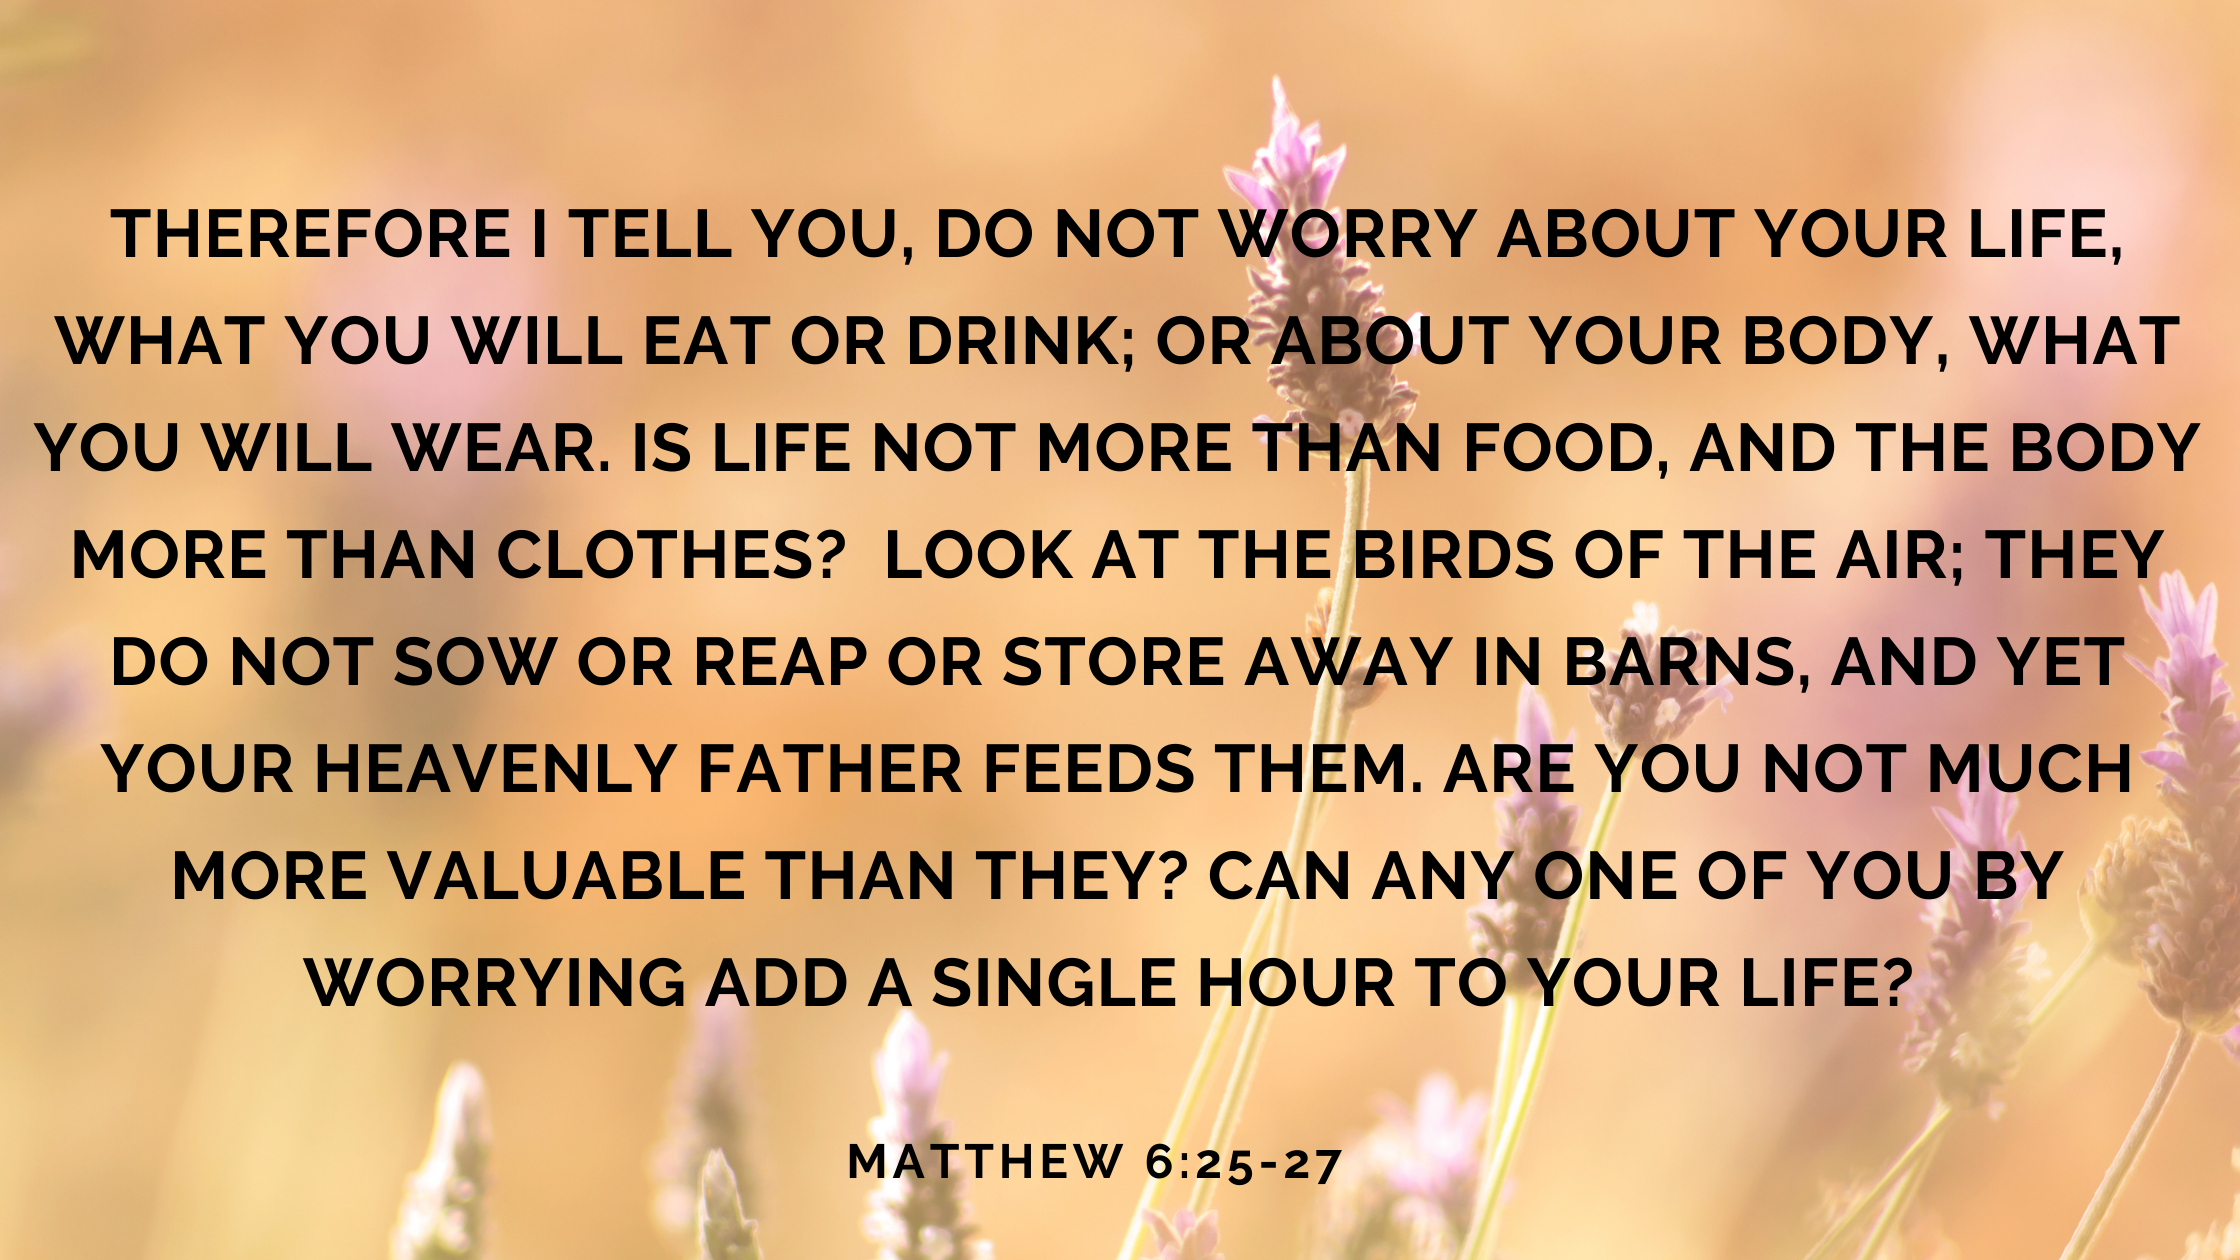 Therefore I tell you, do not worry about your life, what you will eat or drink; or about your body, what you will wear. Is life not more than food, a